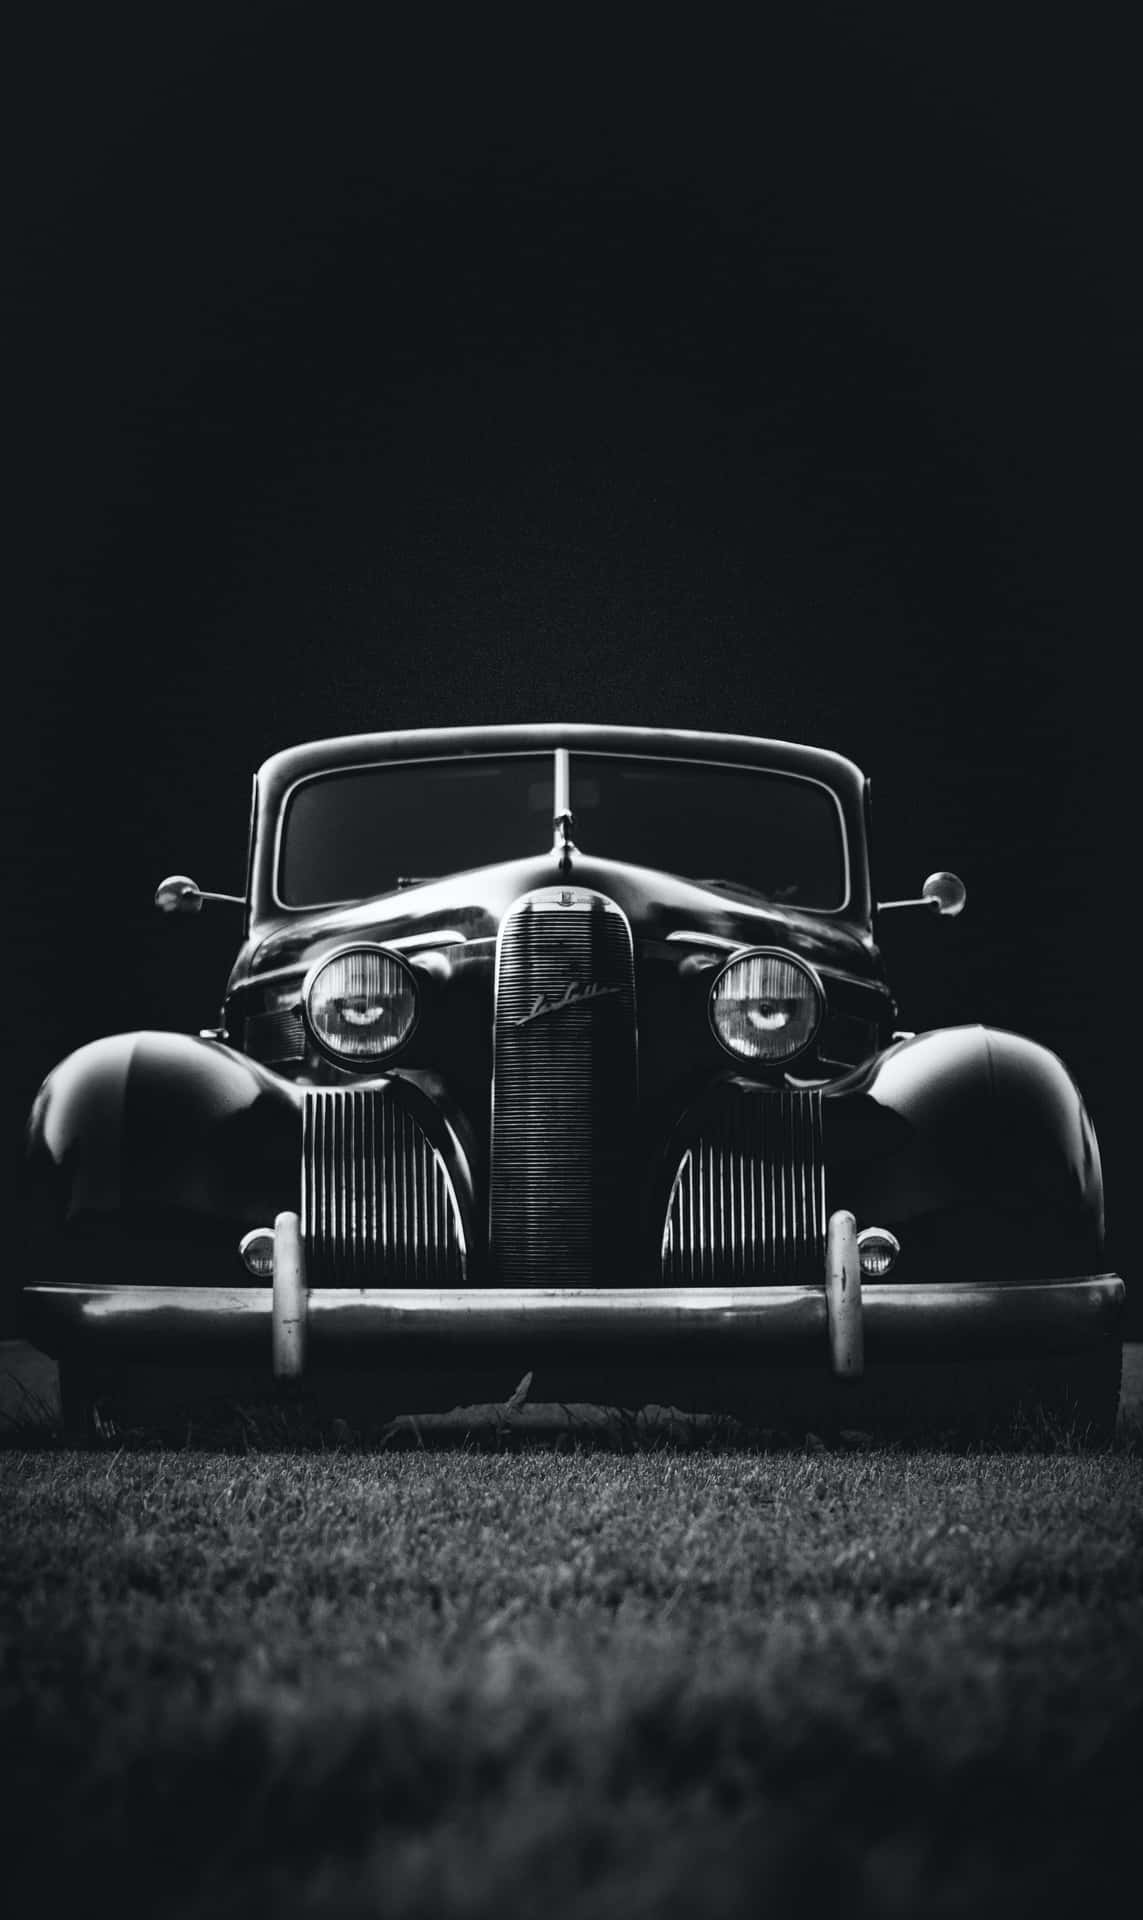 "Revving Up Your Smartphone: Classic Car Iphone" Wallpaper